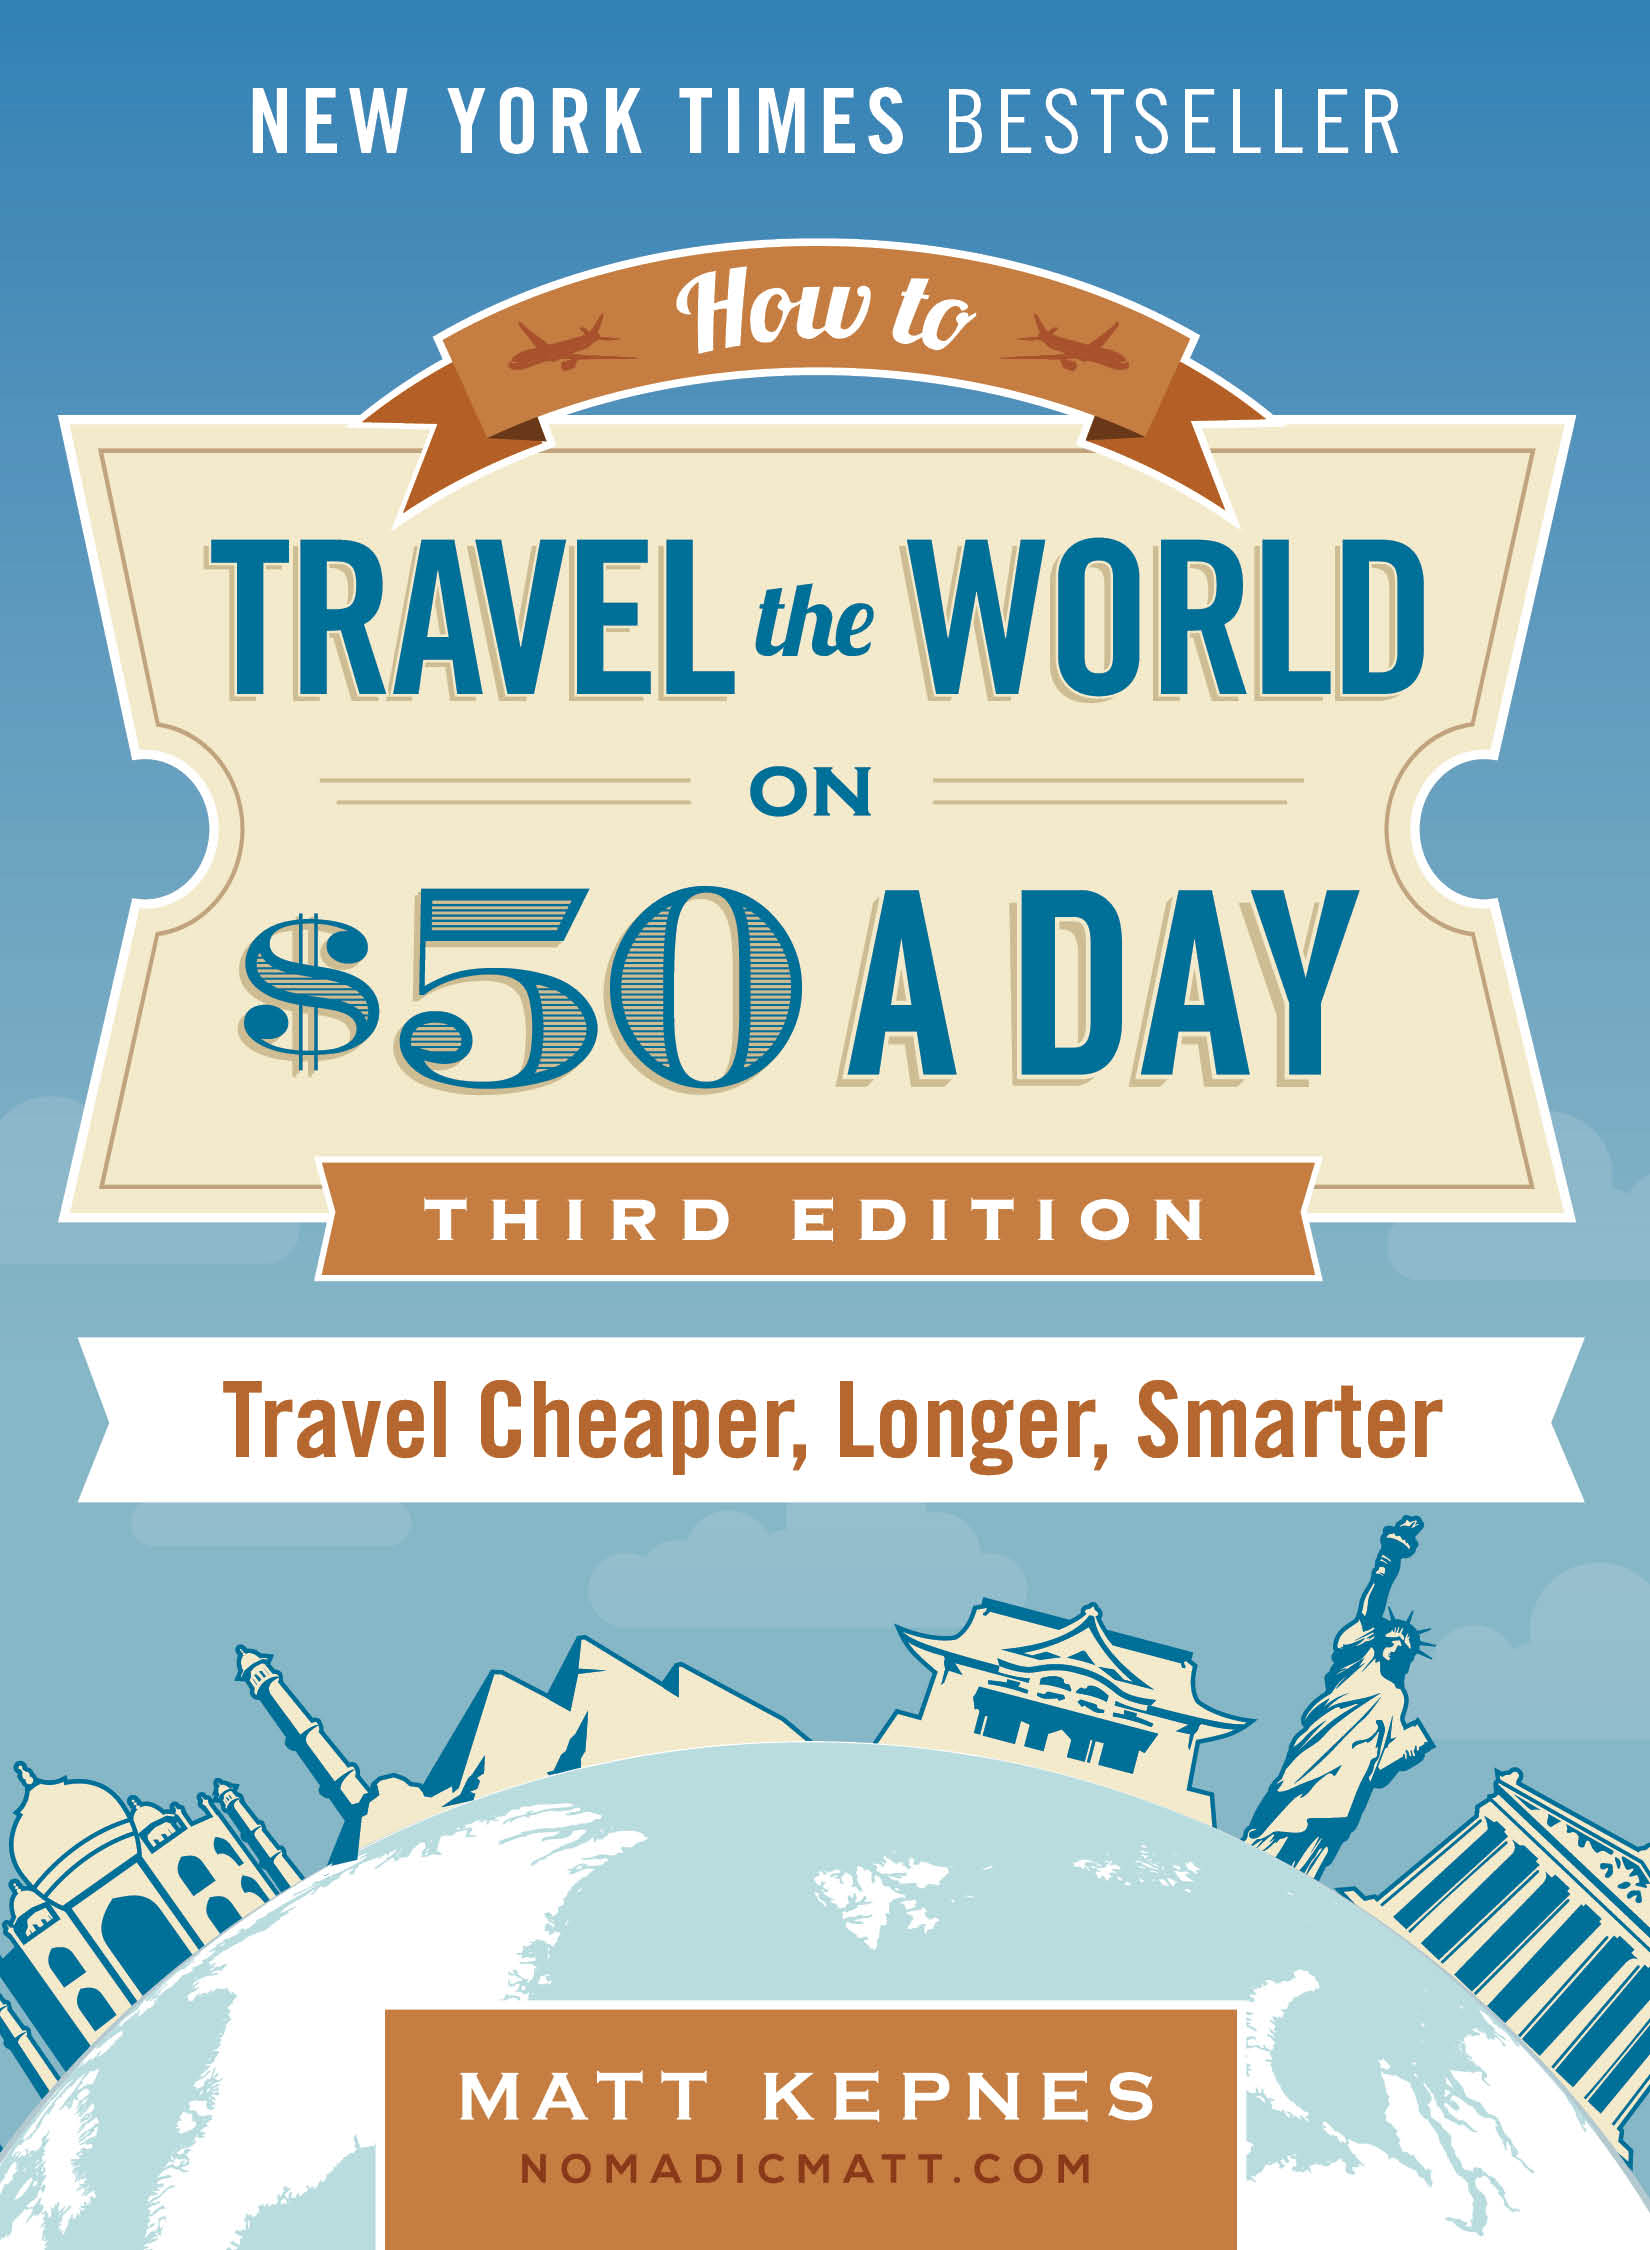 How to Travel the World on $50 book cover